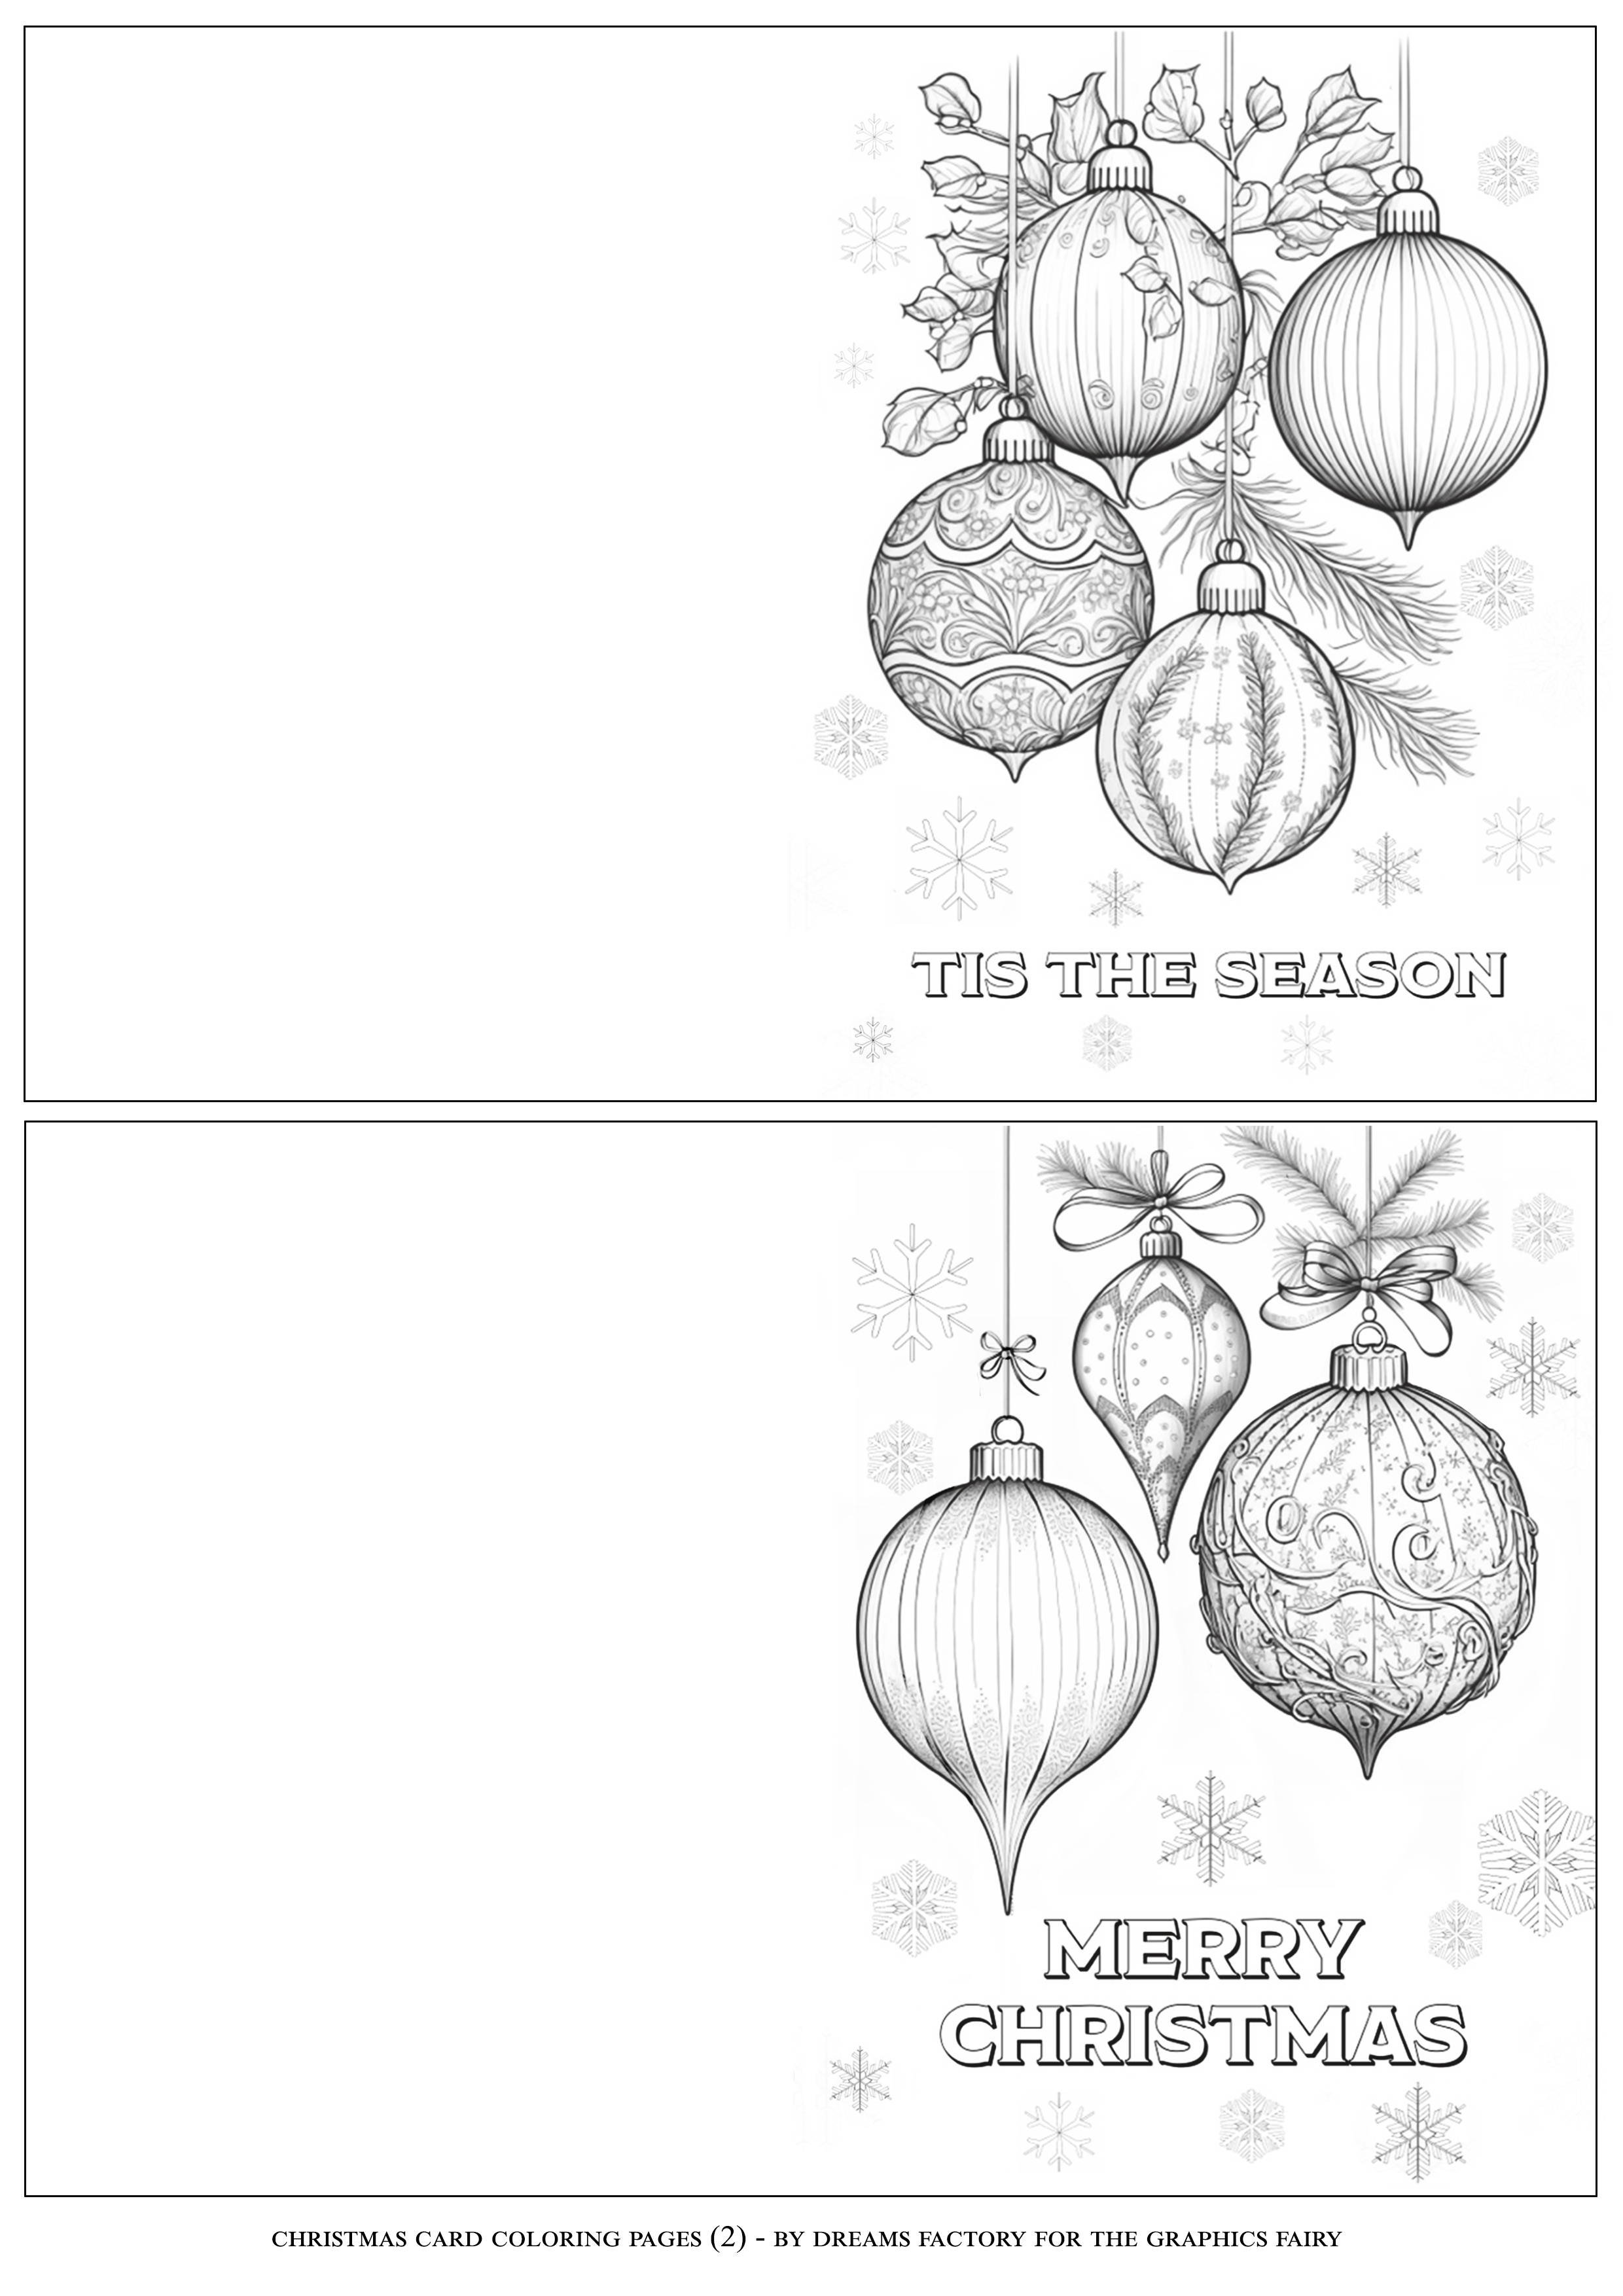 Christmas card coloring pages 2